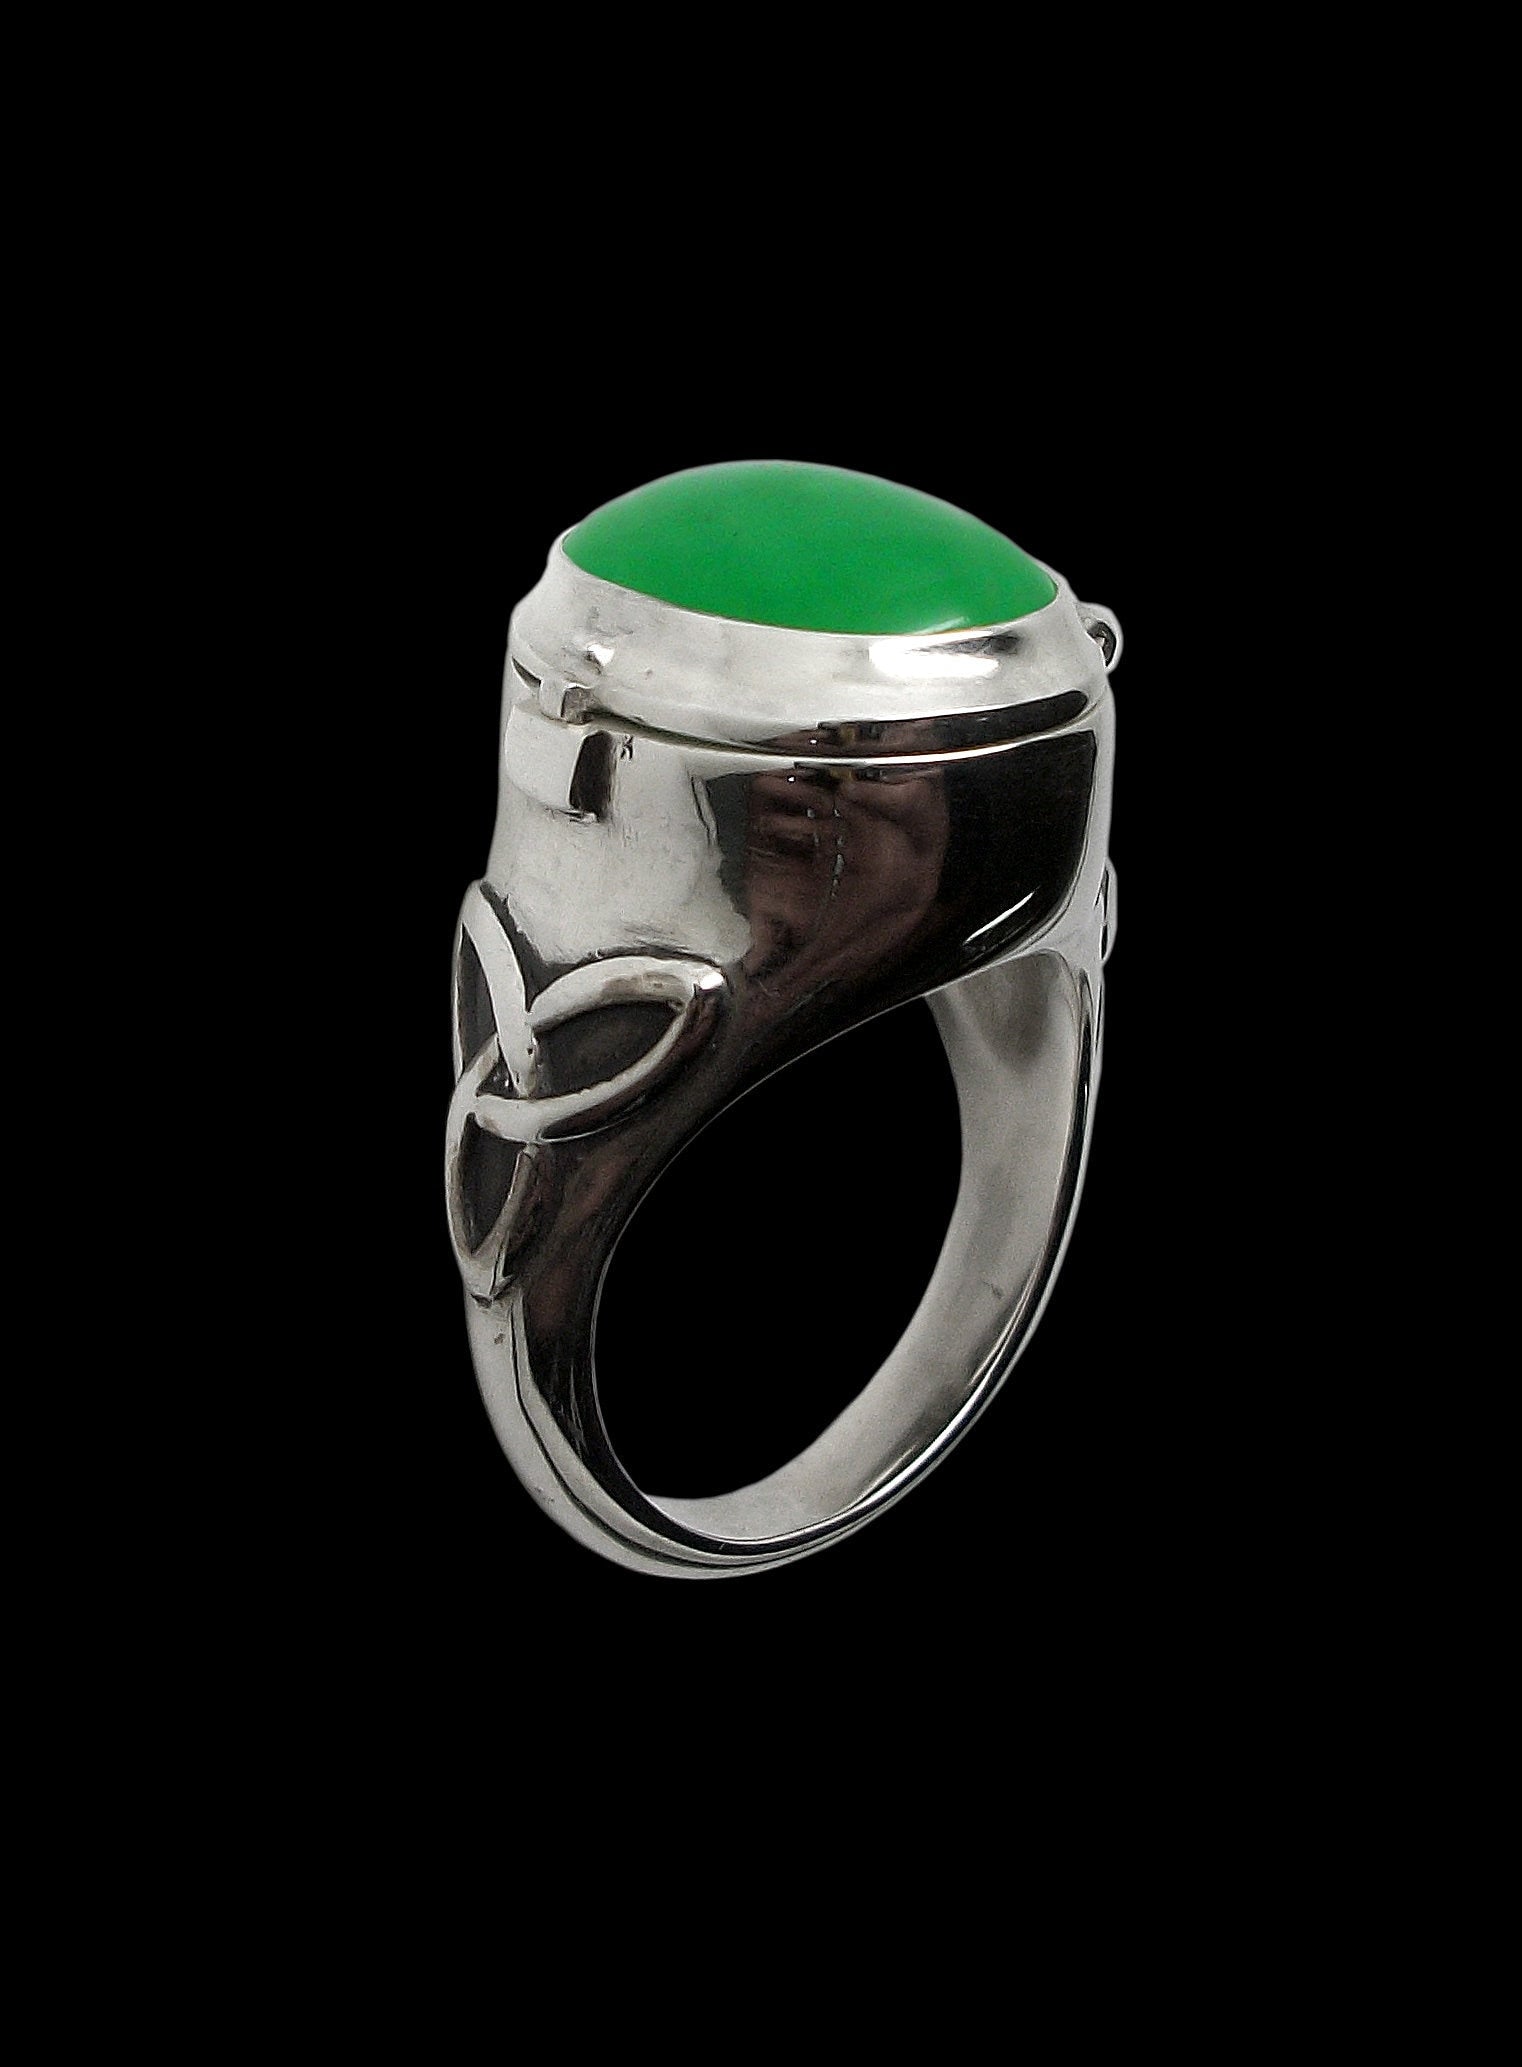 Poison ring - Sterling Silver Poison Pillbox triquetra ring with Green Jade- ALL SIZES